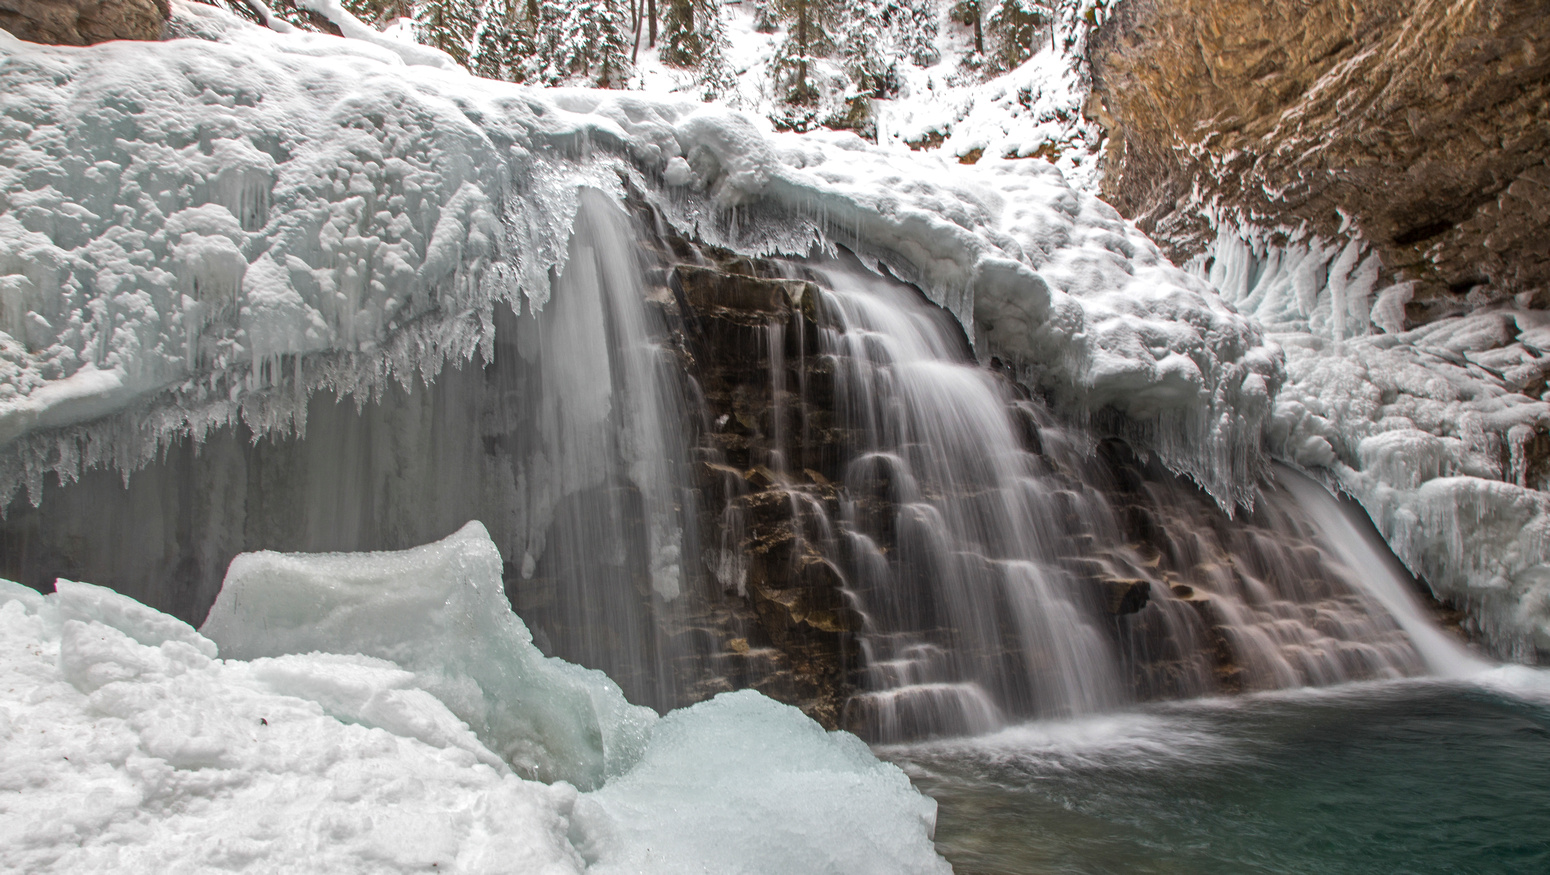 Upper Falls and most photogenic part of Johnston Canyon